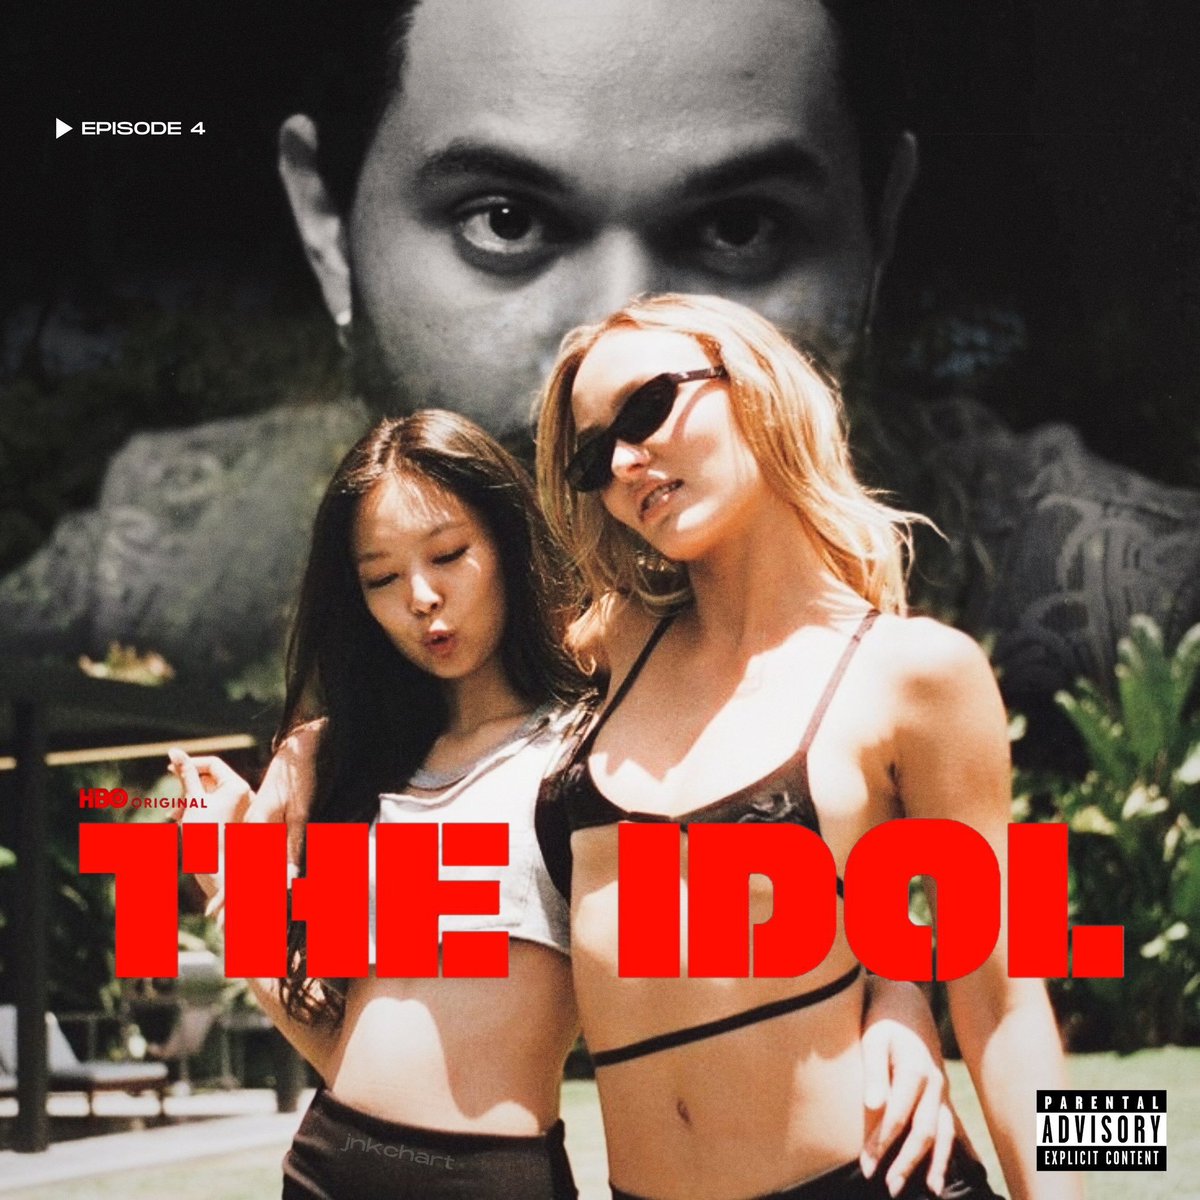 “One Of The Girls” by The Weeknd, #JENNIE & Lily-Rose Depp has now spent 200 days inside the Top 50 of the Spotify Global Chart.